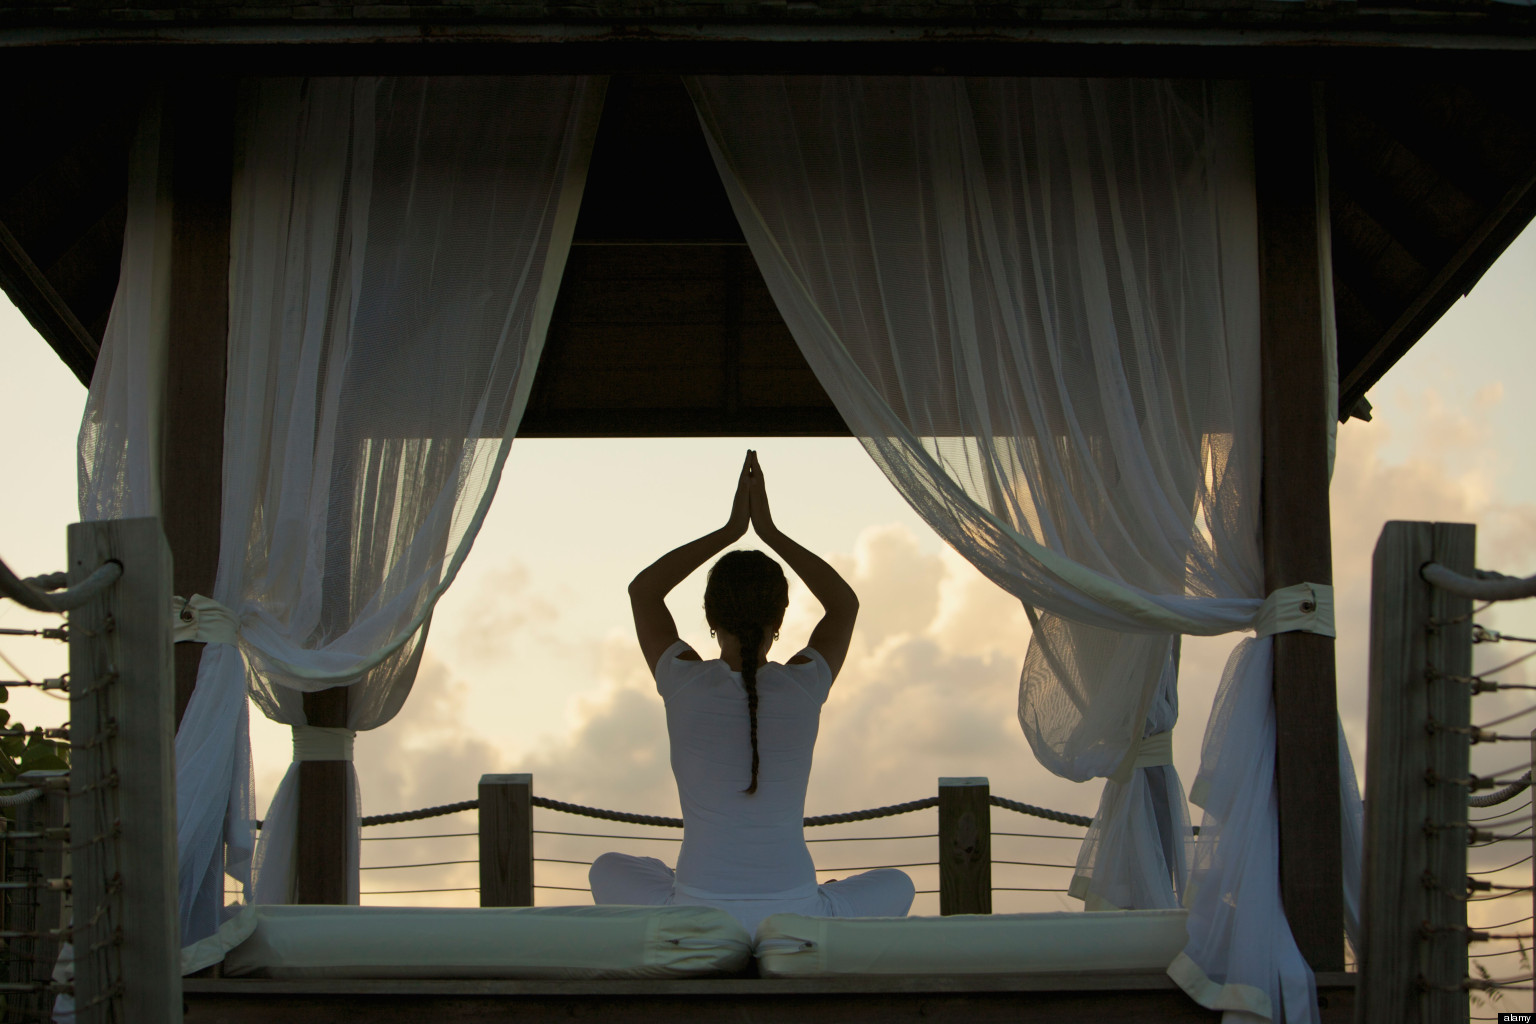 Best Yoga Retreats 2013: 8 Wellness Centers To Visit In The U.S